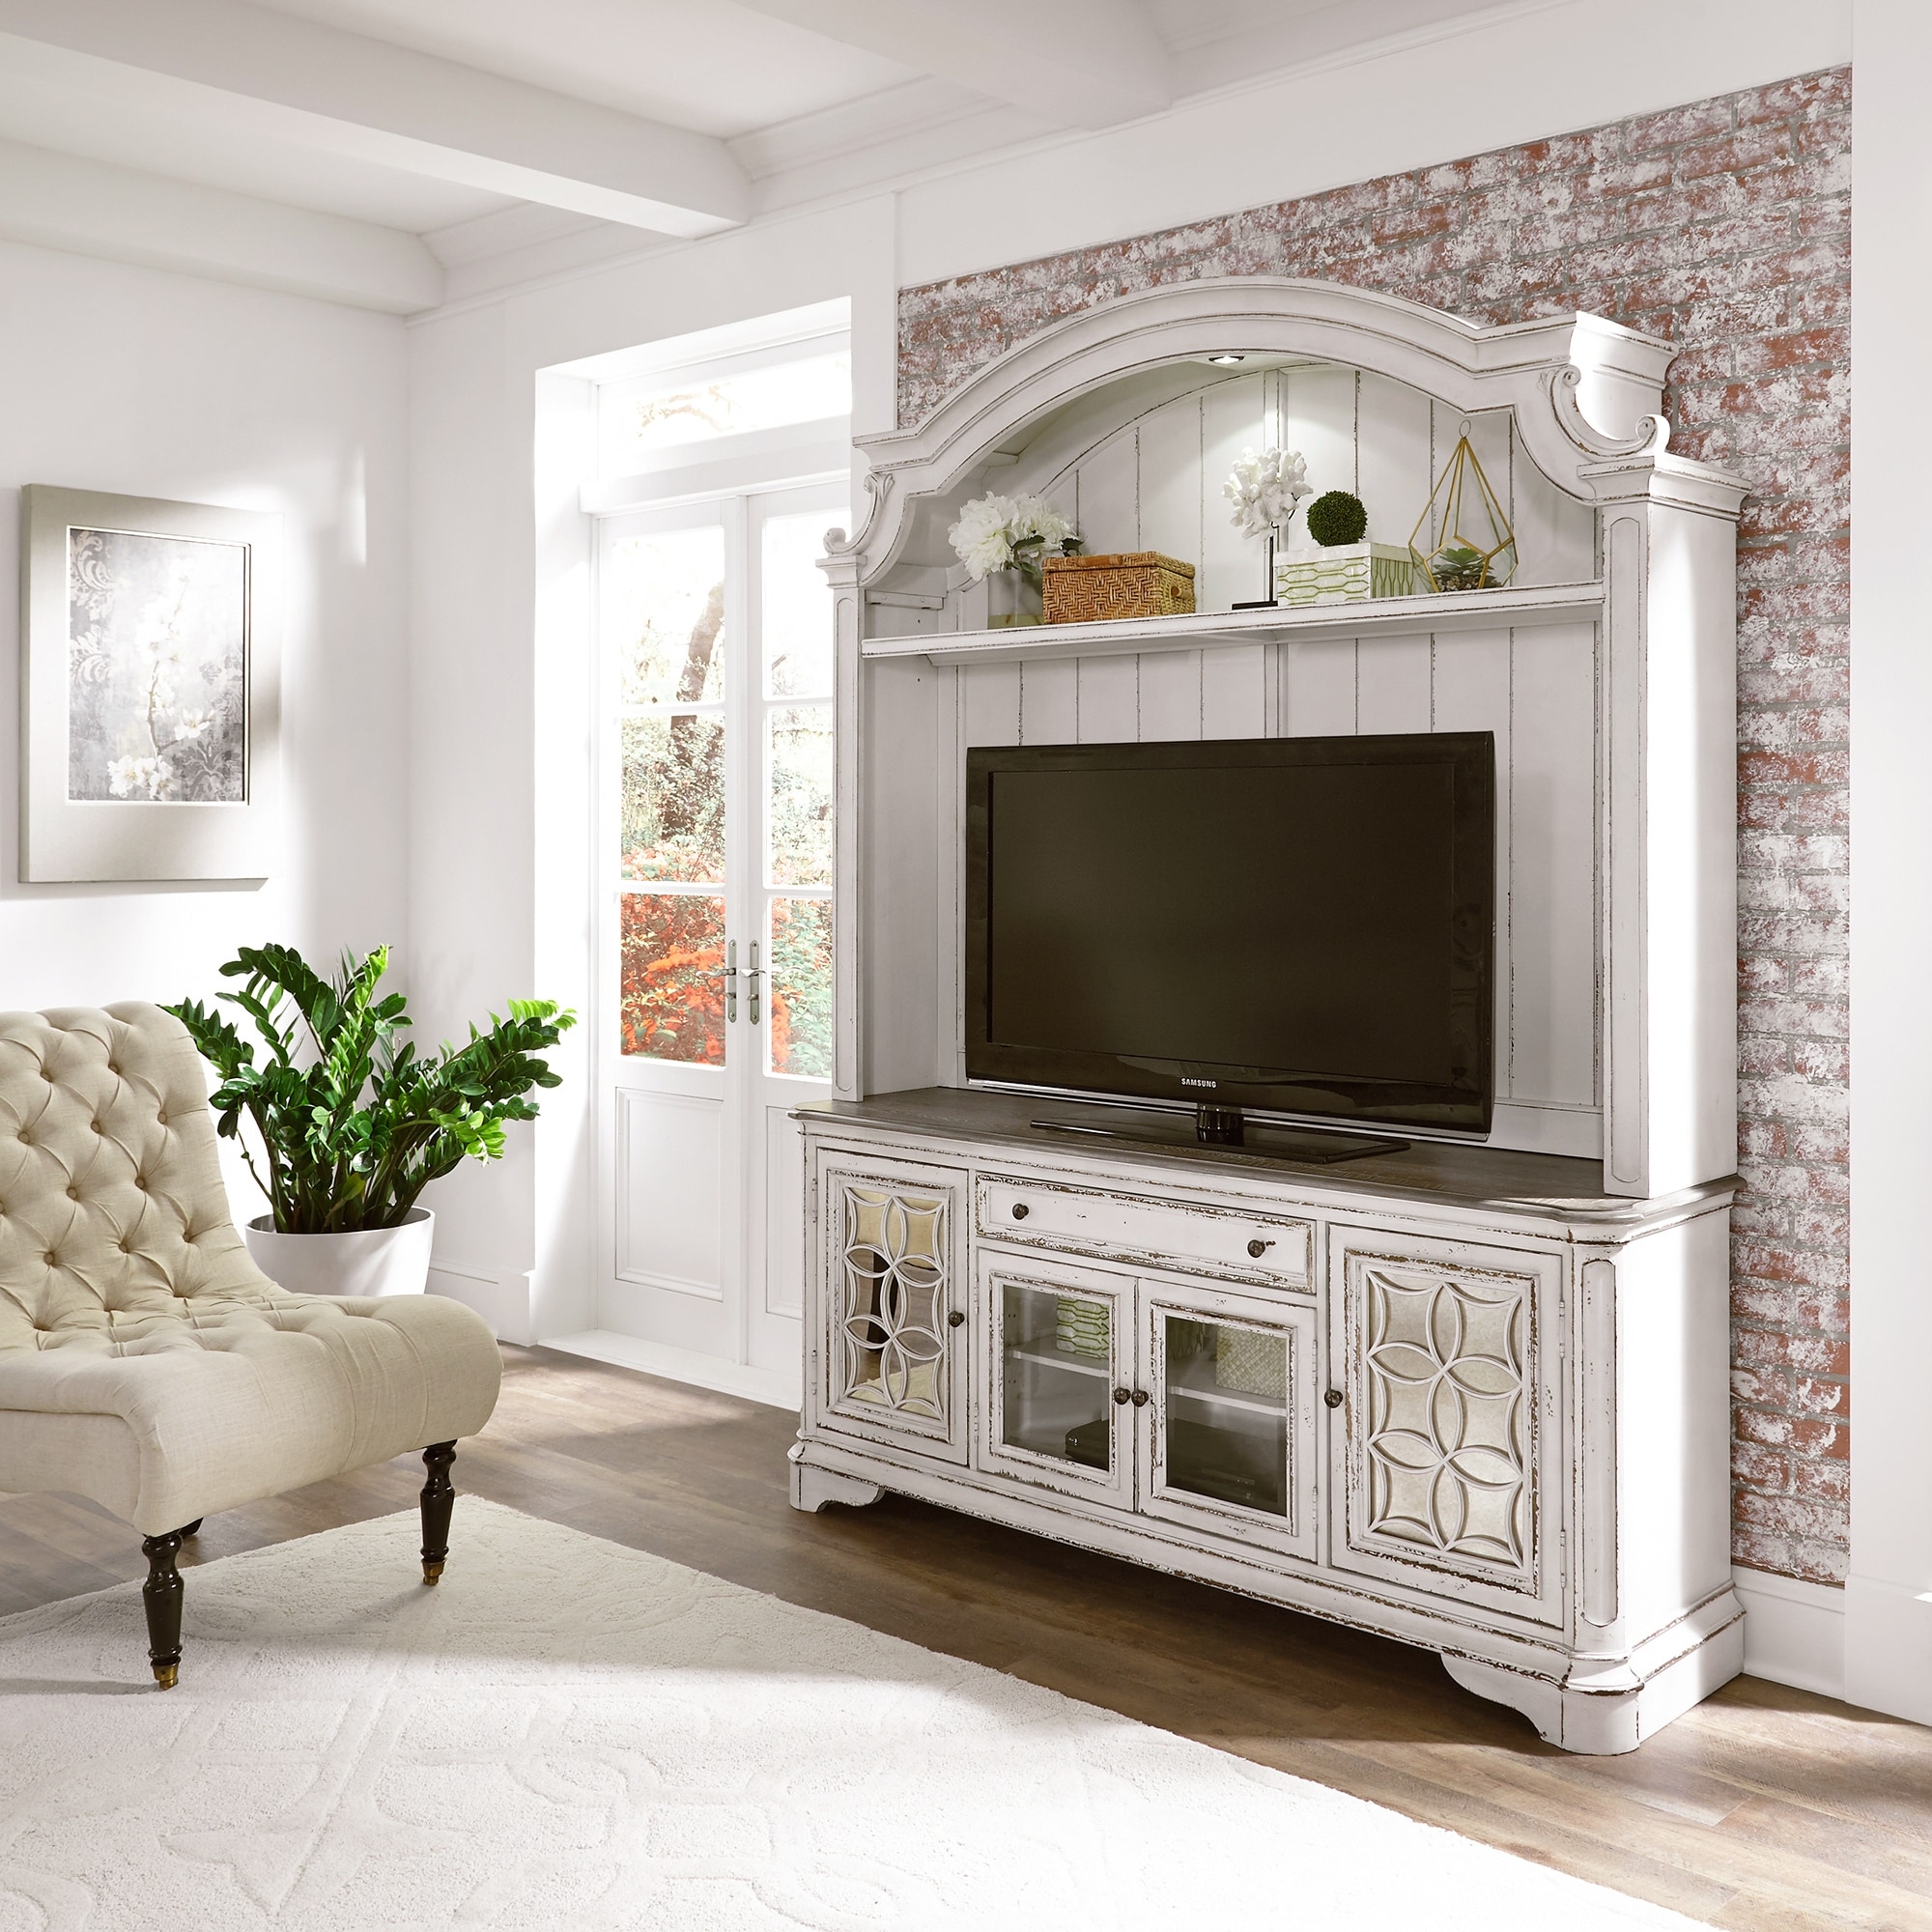 https://ak1.ostkcdn.com/images/products/is/images/direct/845bd450d98cb121d8d8a98063d049b0f2e83f1c/Magnolia-Manor-Antique-White-Weathered-Bark-Entertainment-Center.jpg